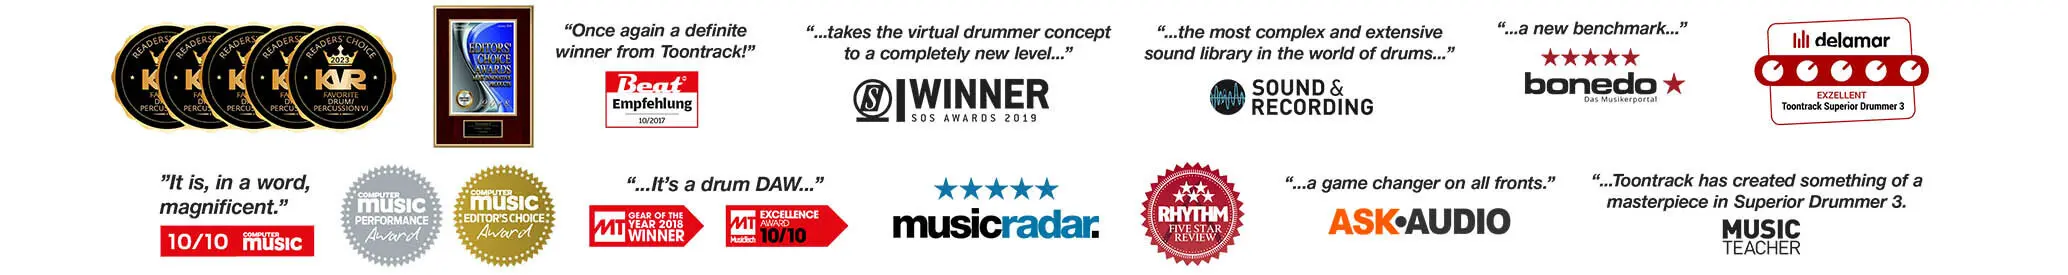 Awards of Superior Drummer 3 music composition software